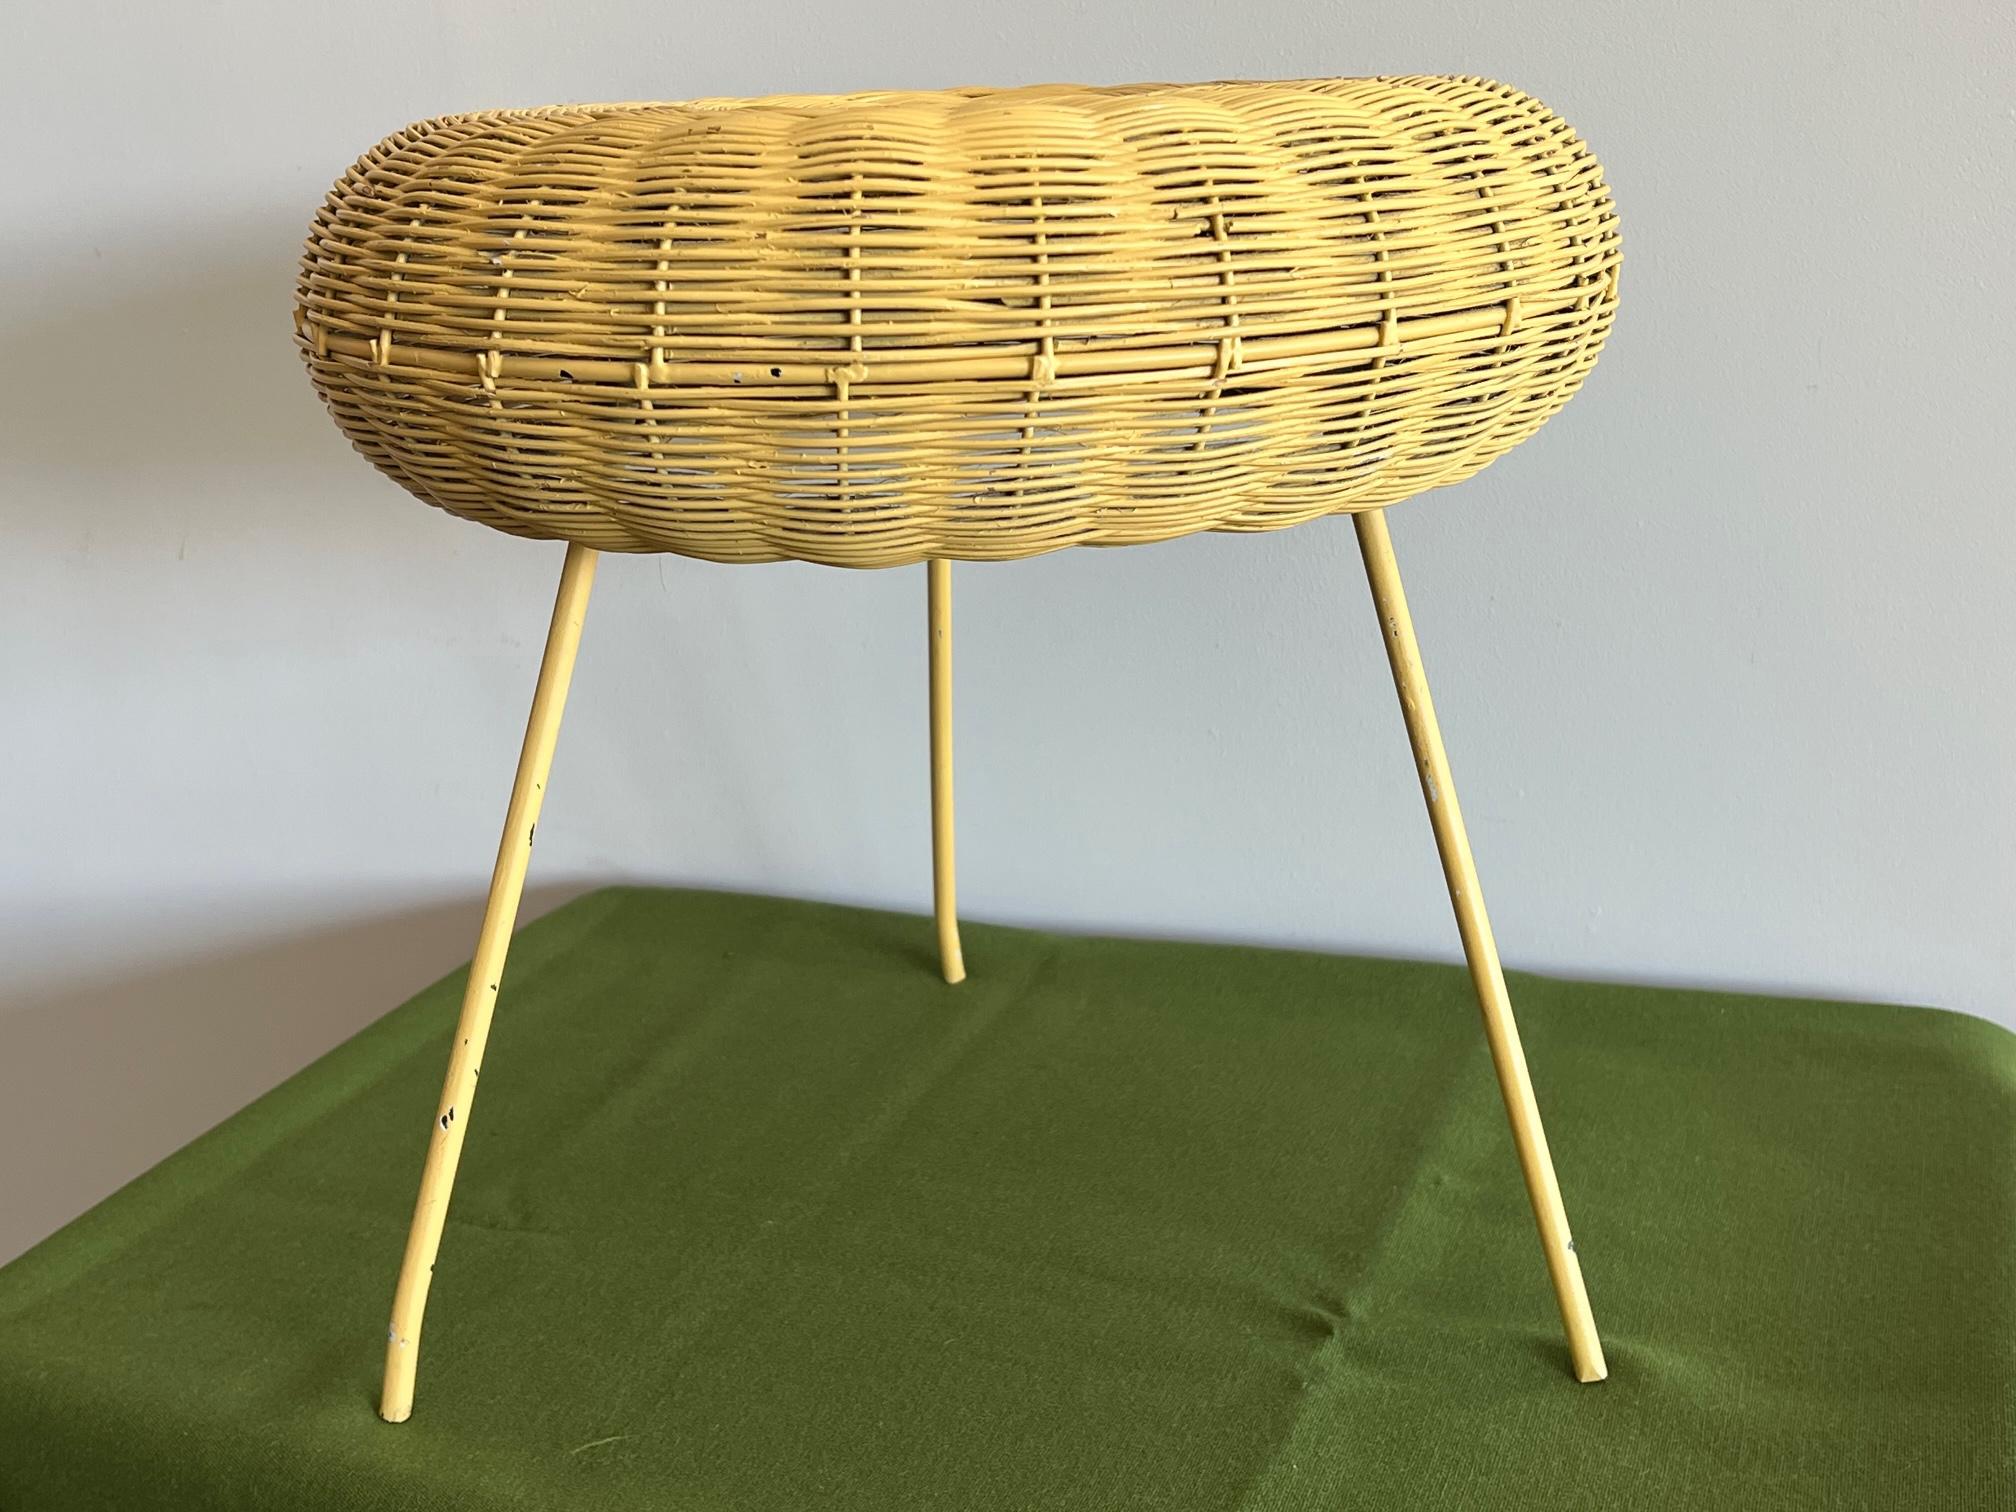 Two Vintage Wicker Stools For Sale 1